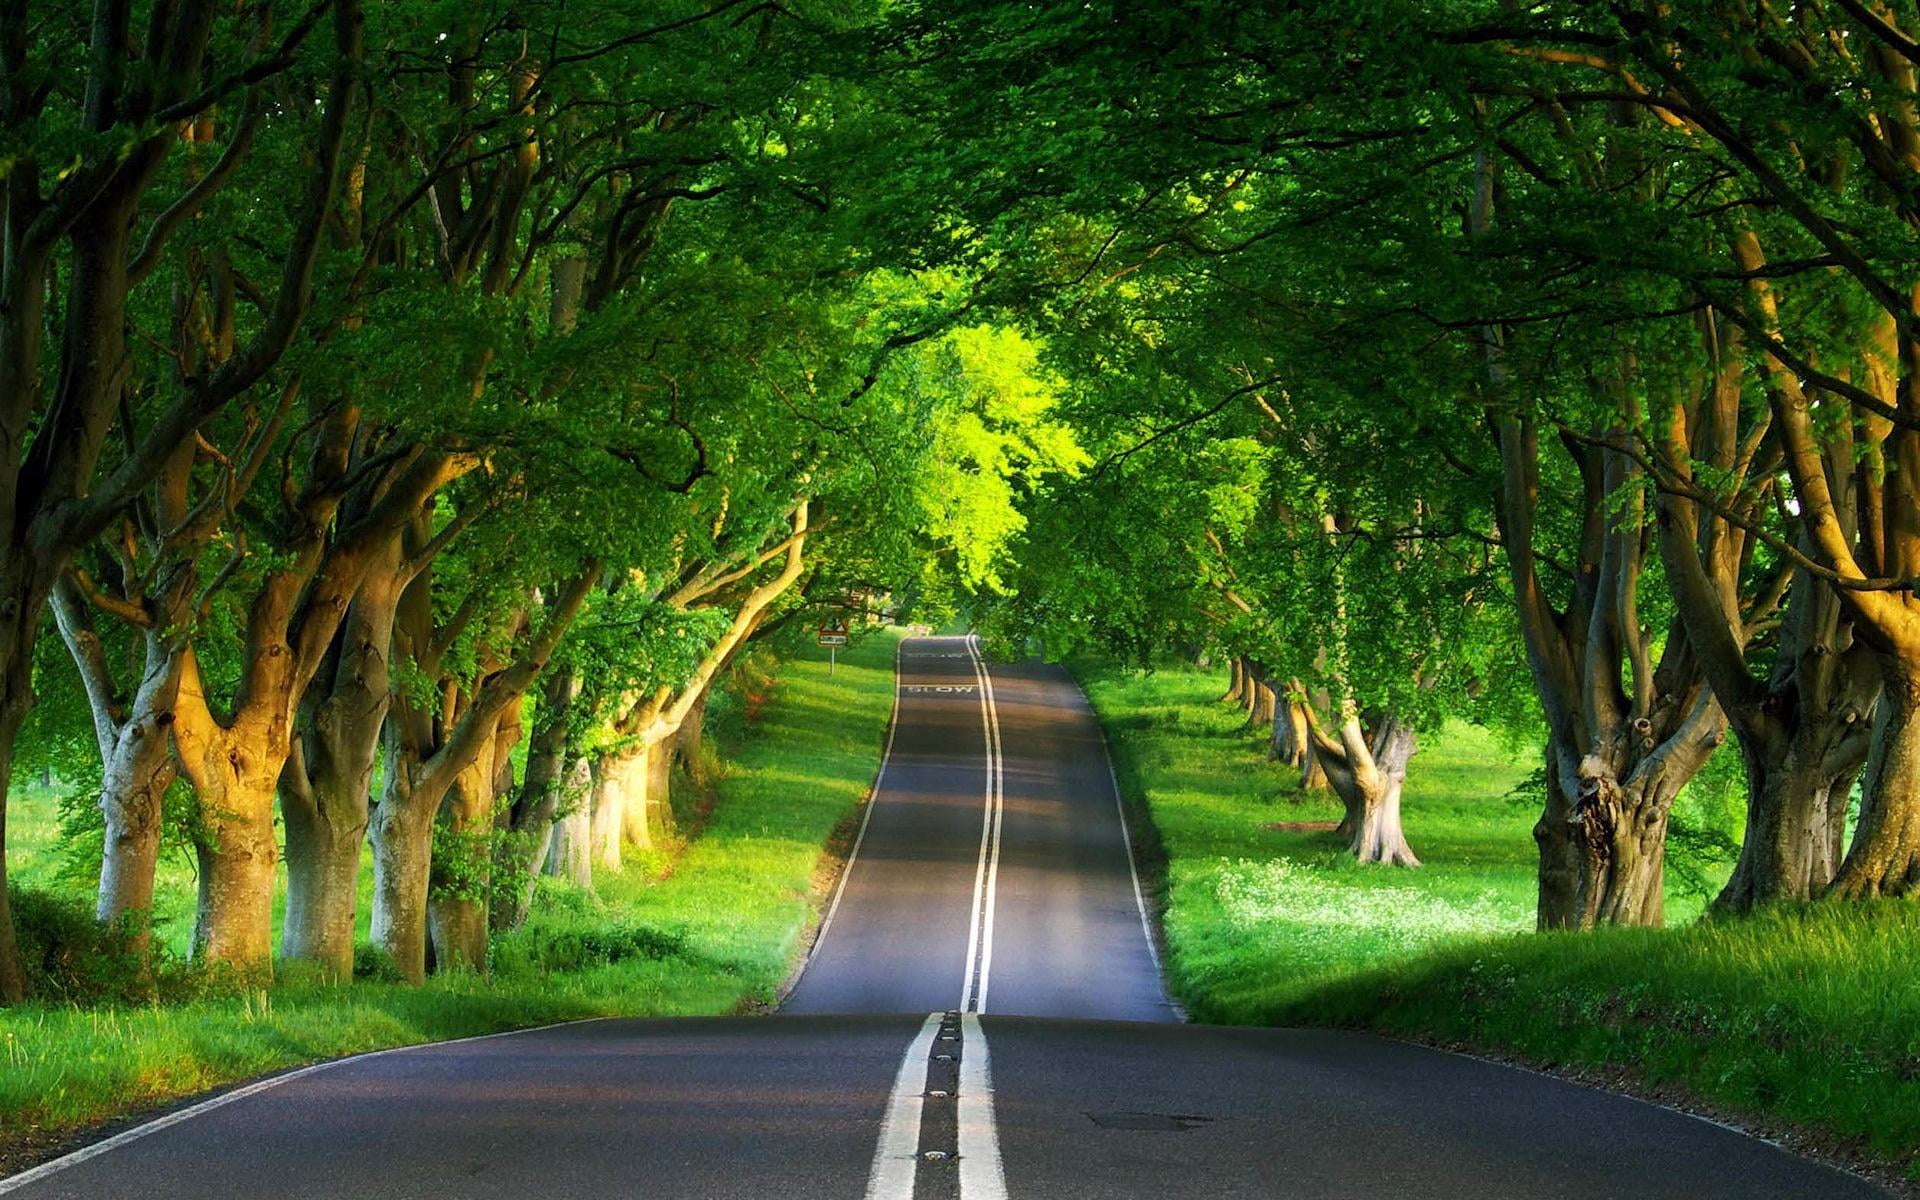 Green Road, gray concrete roadway and tree tunnel, Nature, Summer